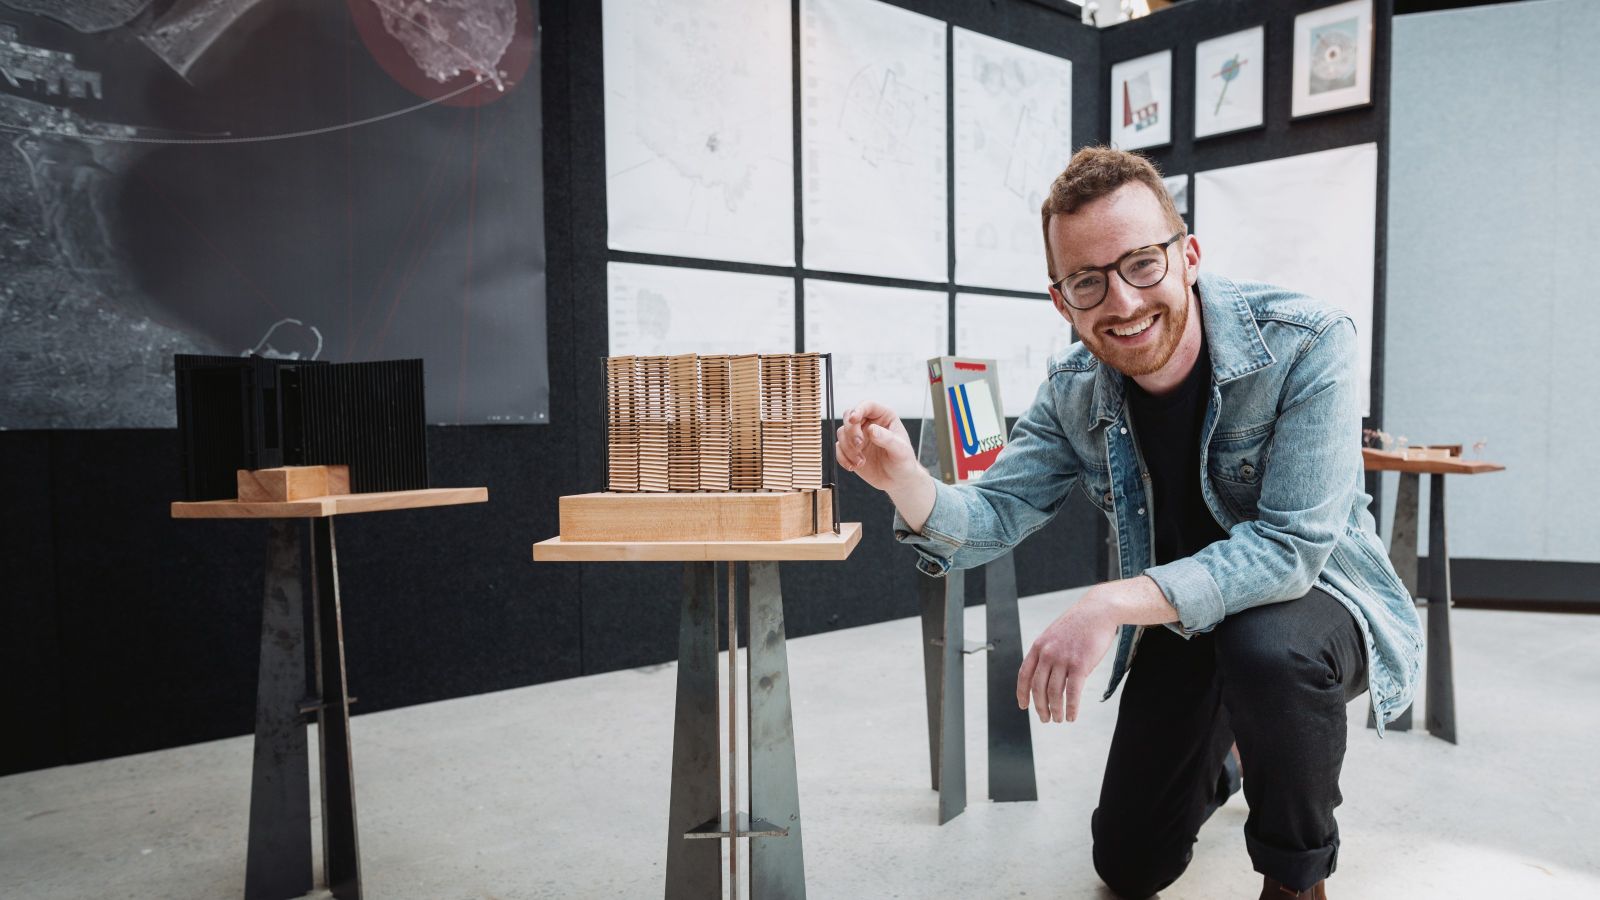 patrick kelly crouches with wooden architectural model in exhibition of architectural models and maps